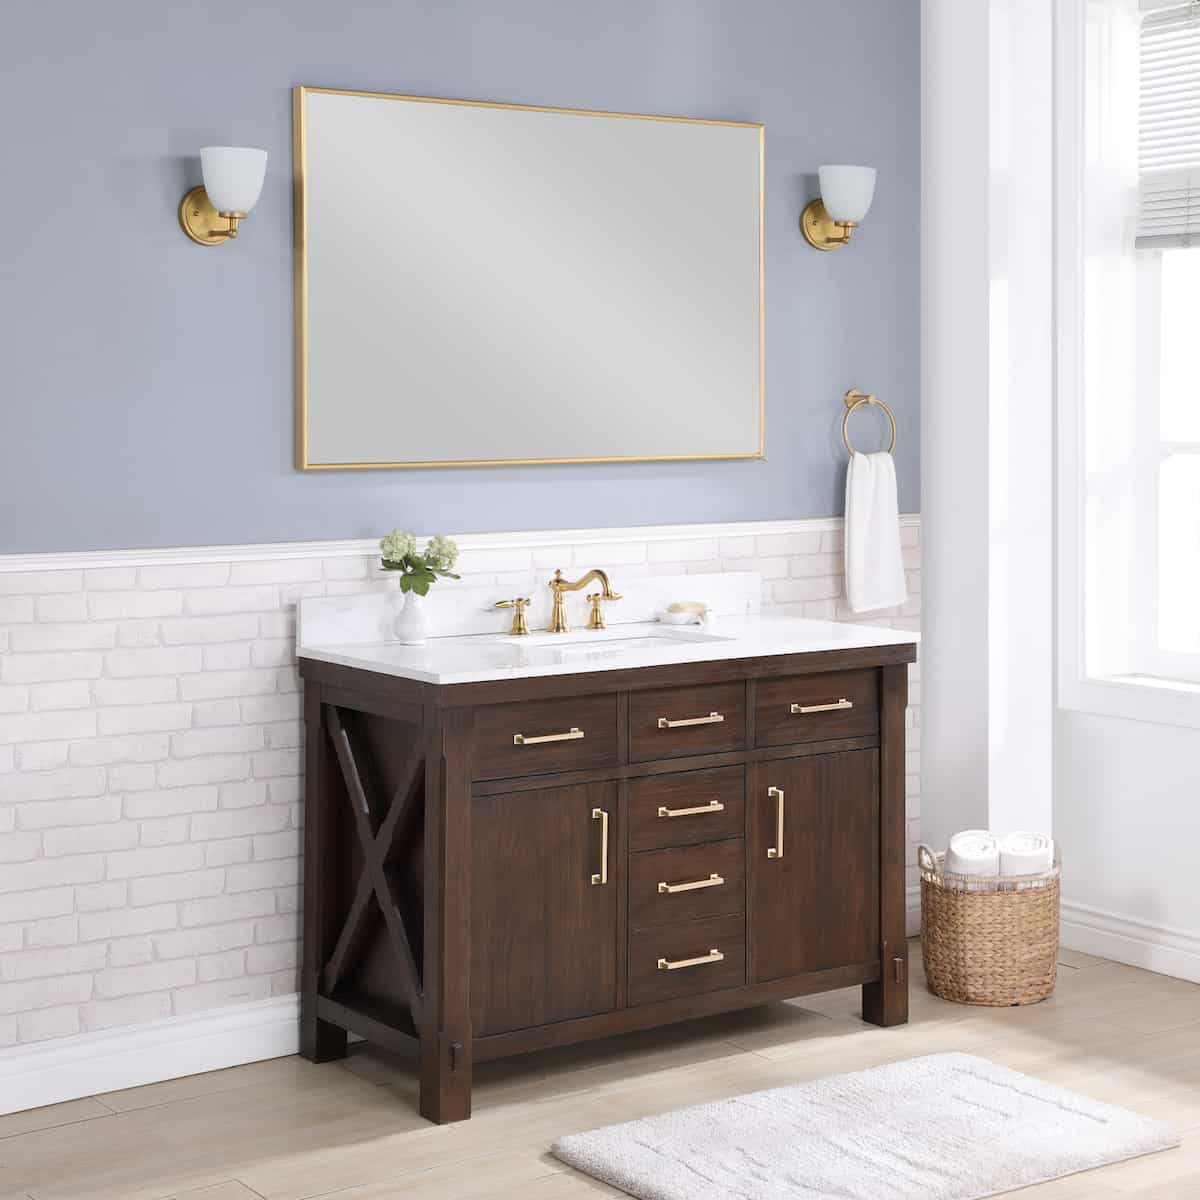 Vinnova Viella 48 Inch Freestanding Single Sink Bath Vanity in Deep Walnut Finish with White Composite Countertop With Mirror Side 701848-DW-WS